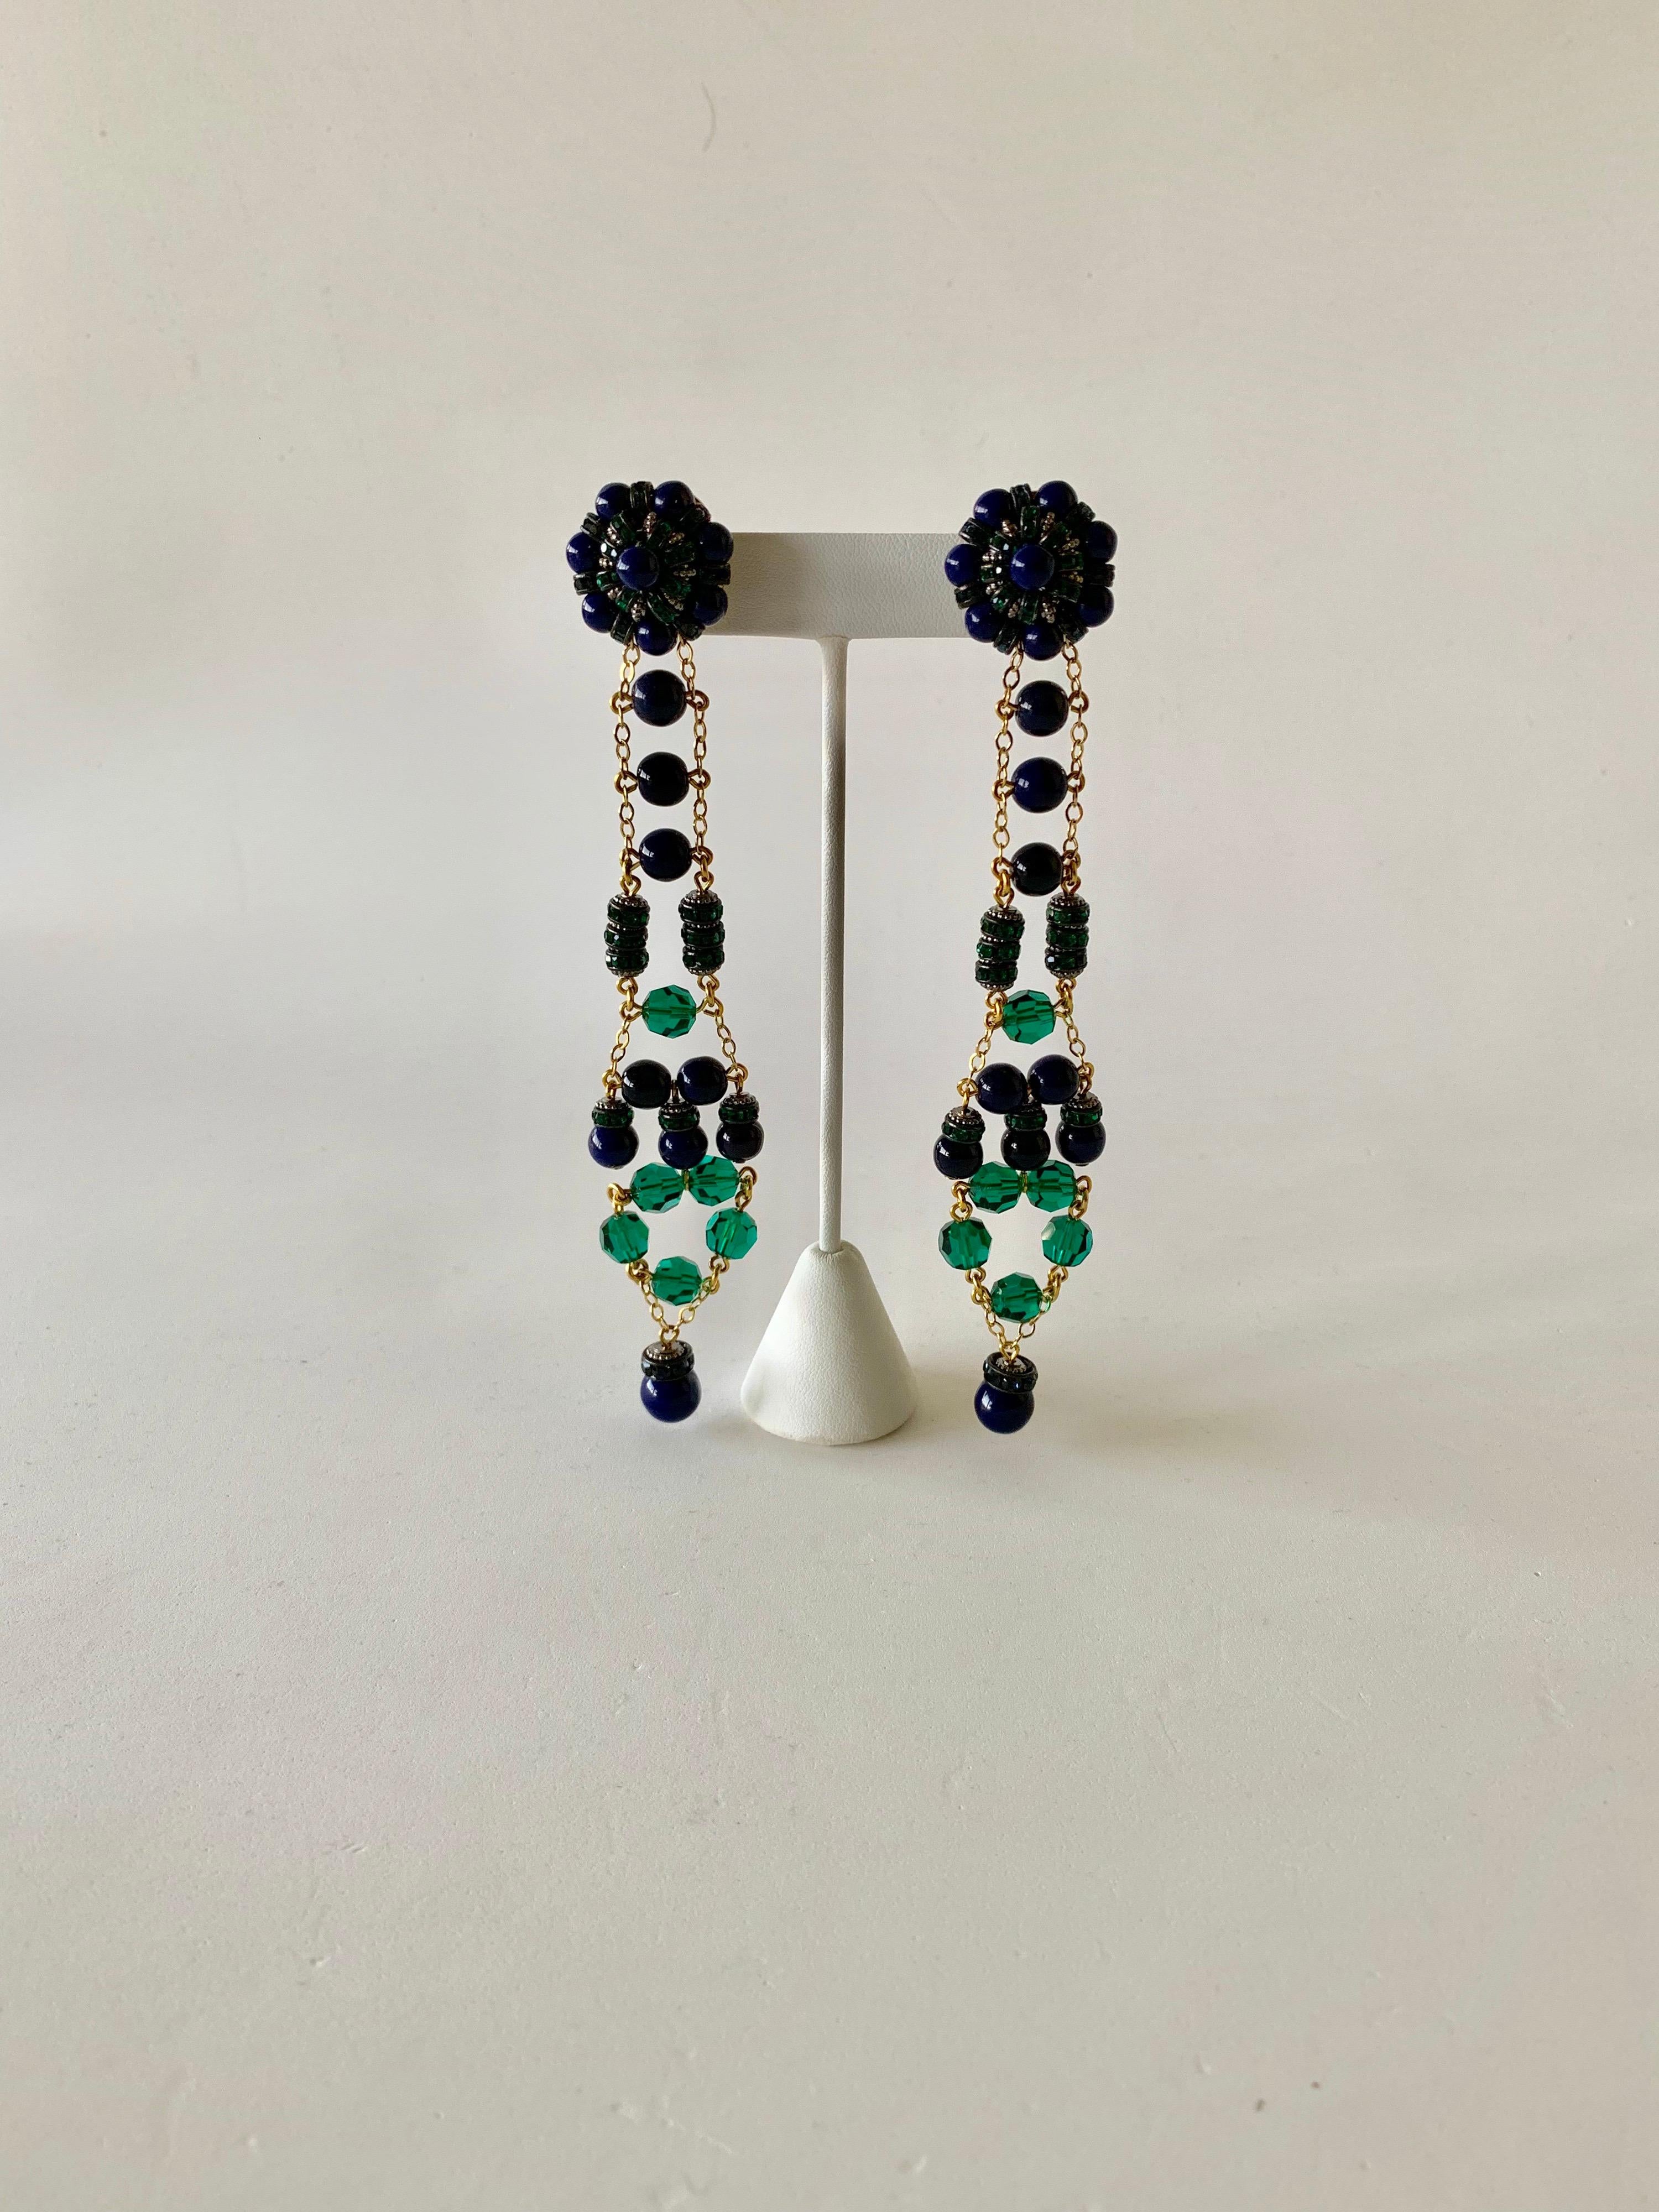 Green and navy blue contemporary French designer chandelier clip-on statement earrings created by Francoise Montague Paris, Circa 2000s. The long linear earrings are comprised out of gilt chain and a mixture of smooth blue glass beads which are